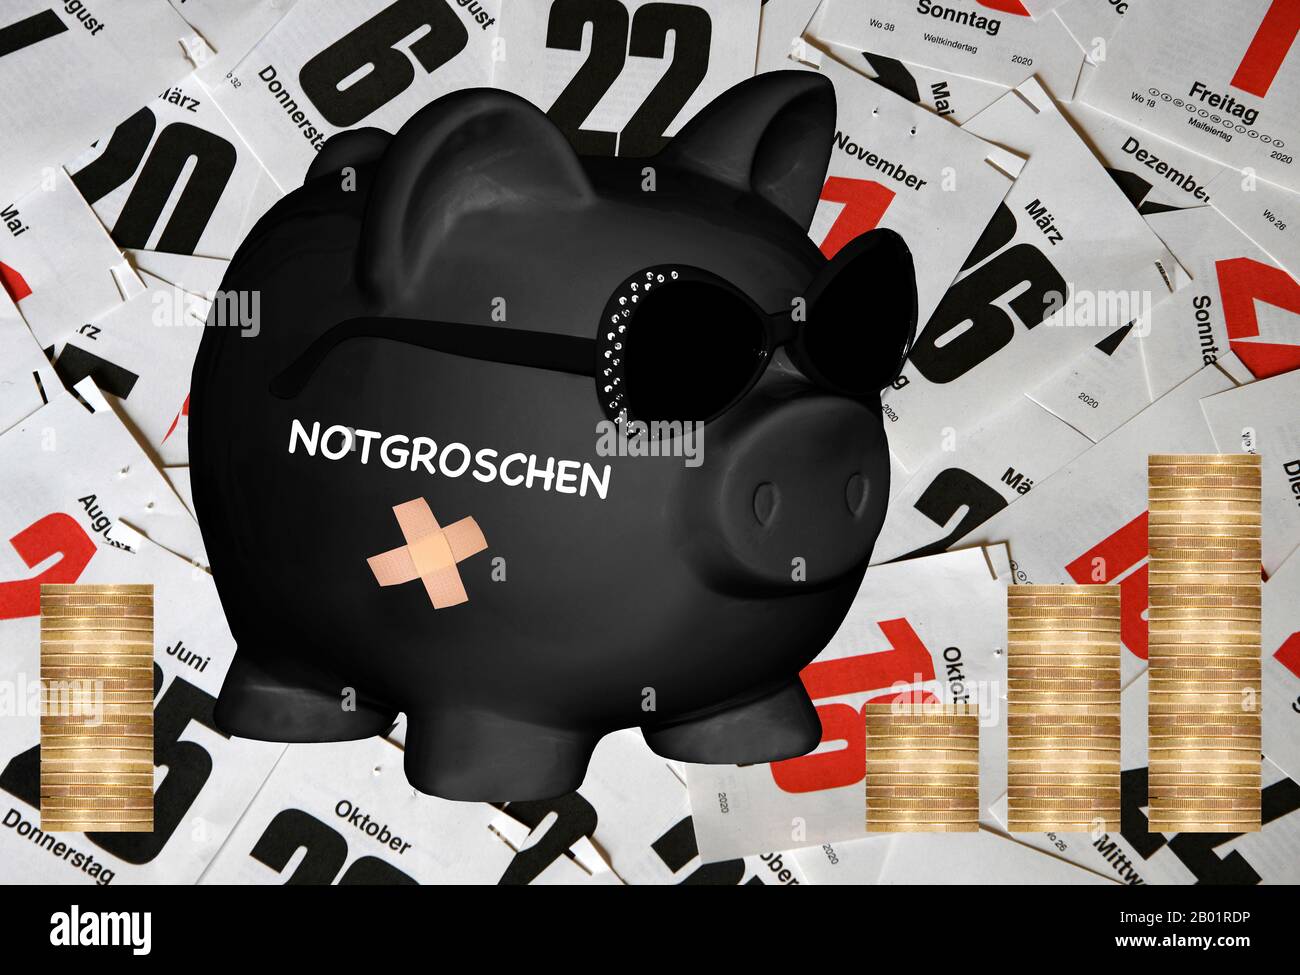 , black piggy bank with sunglasses and lettering Notgroschen, nest egg, calendar sheets and coin piles in background, composing Stock Photo